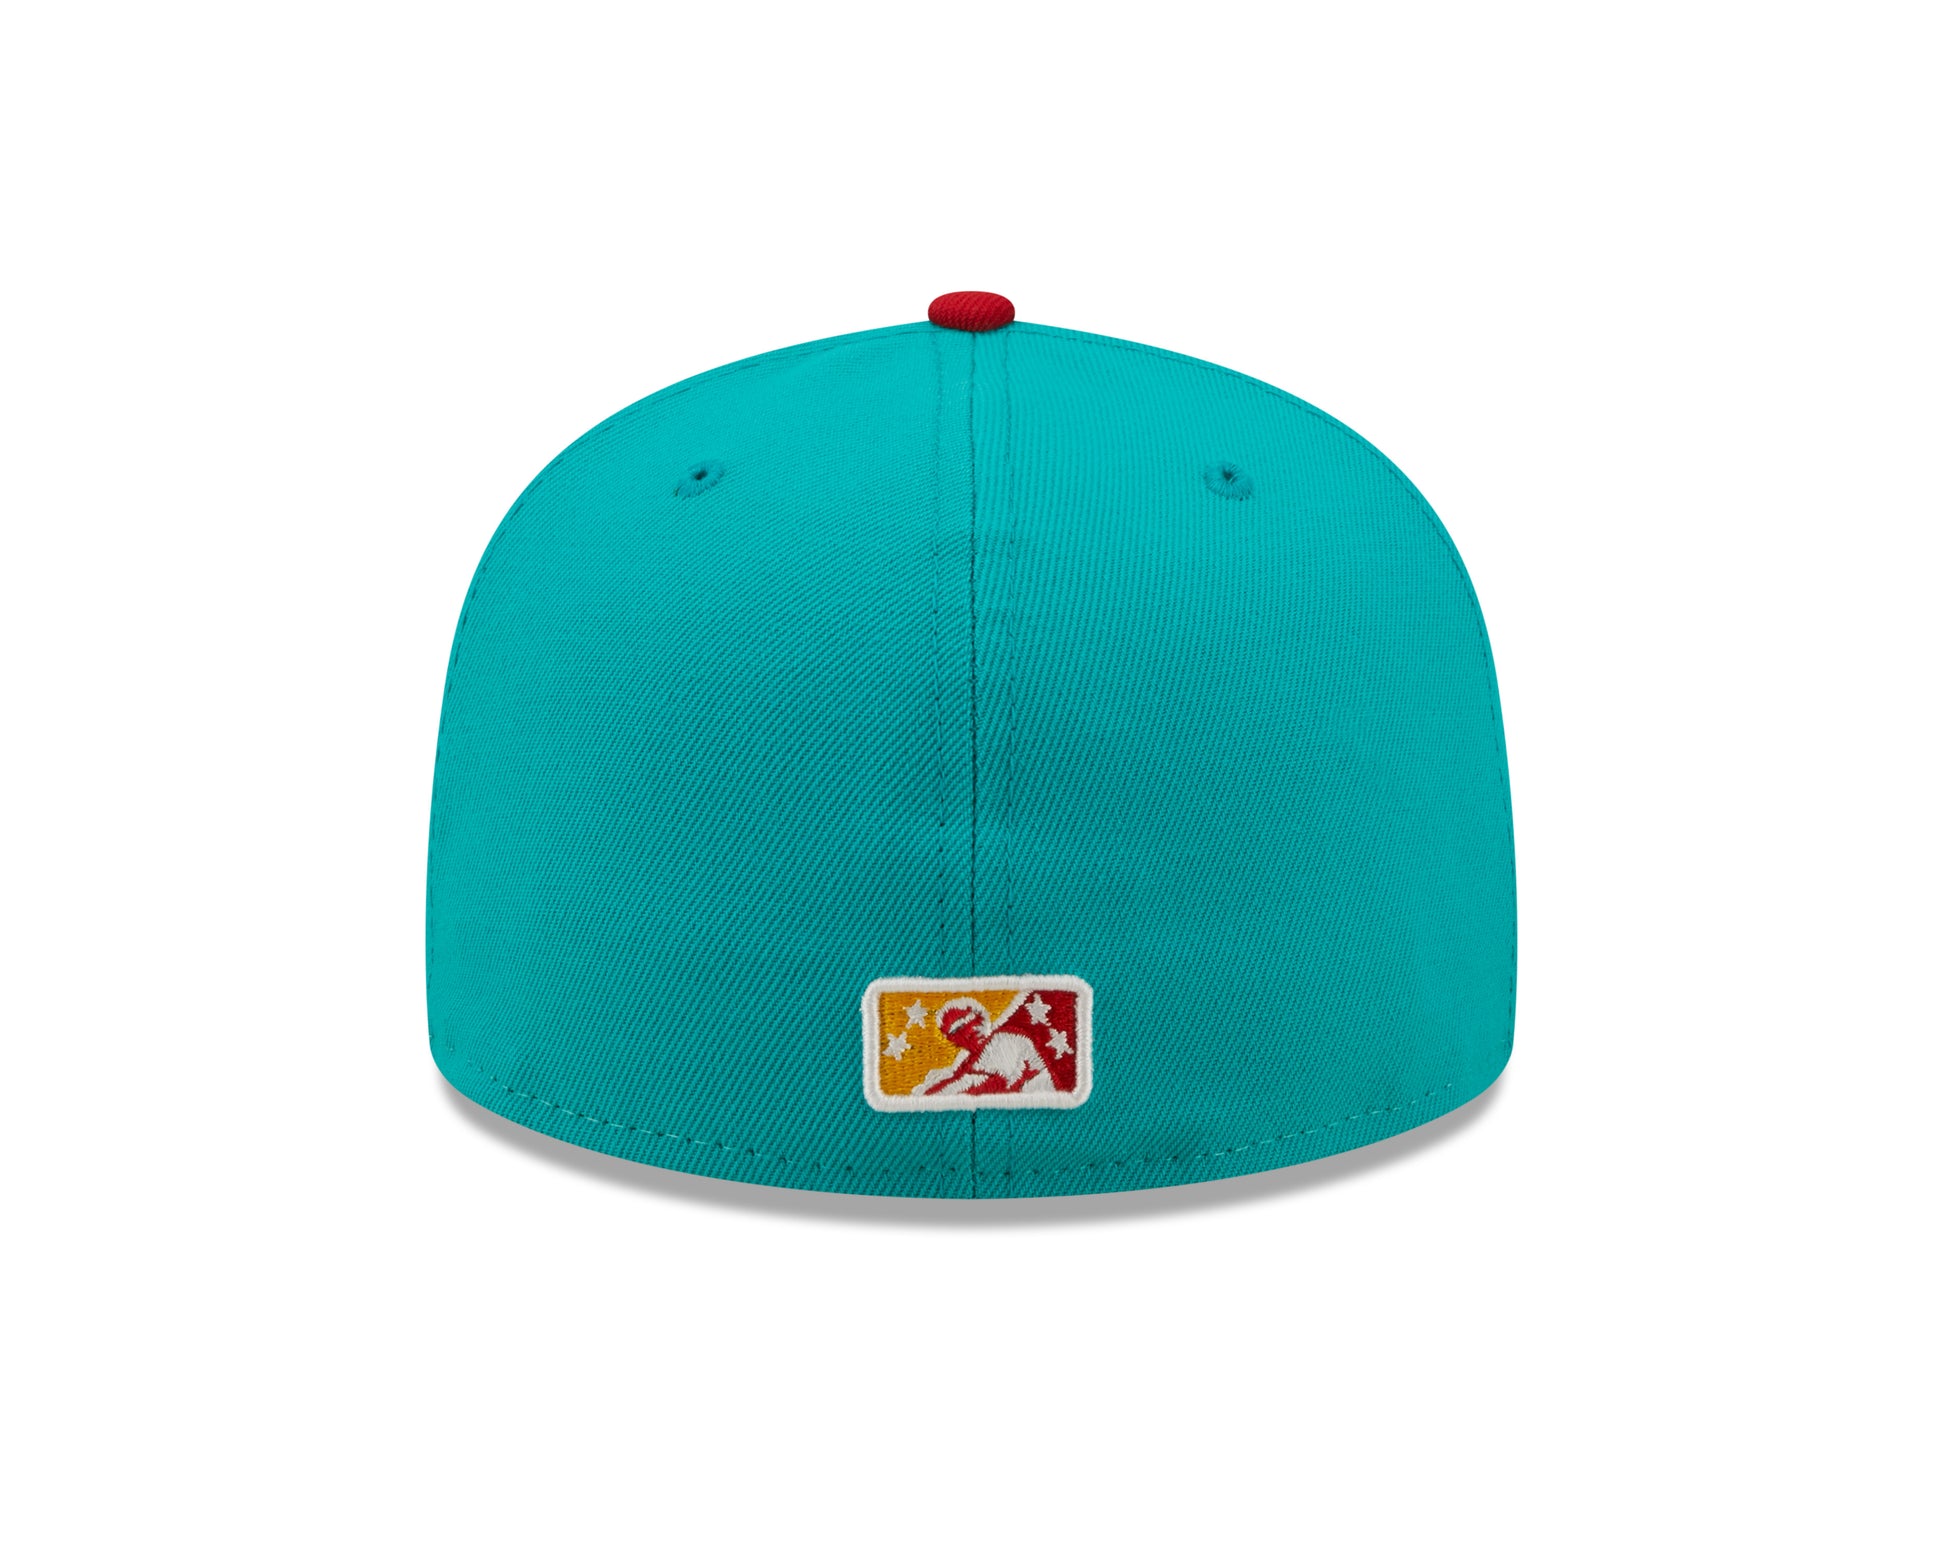 New Era - 59fifty Fitted - MiLB - COPA - Columbus Clippers - White/Teal/Real - Headz Up 